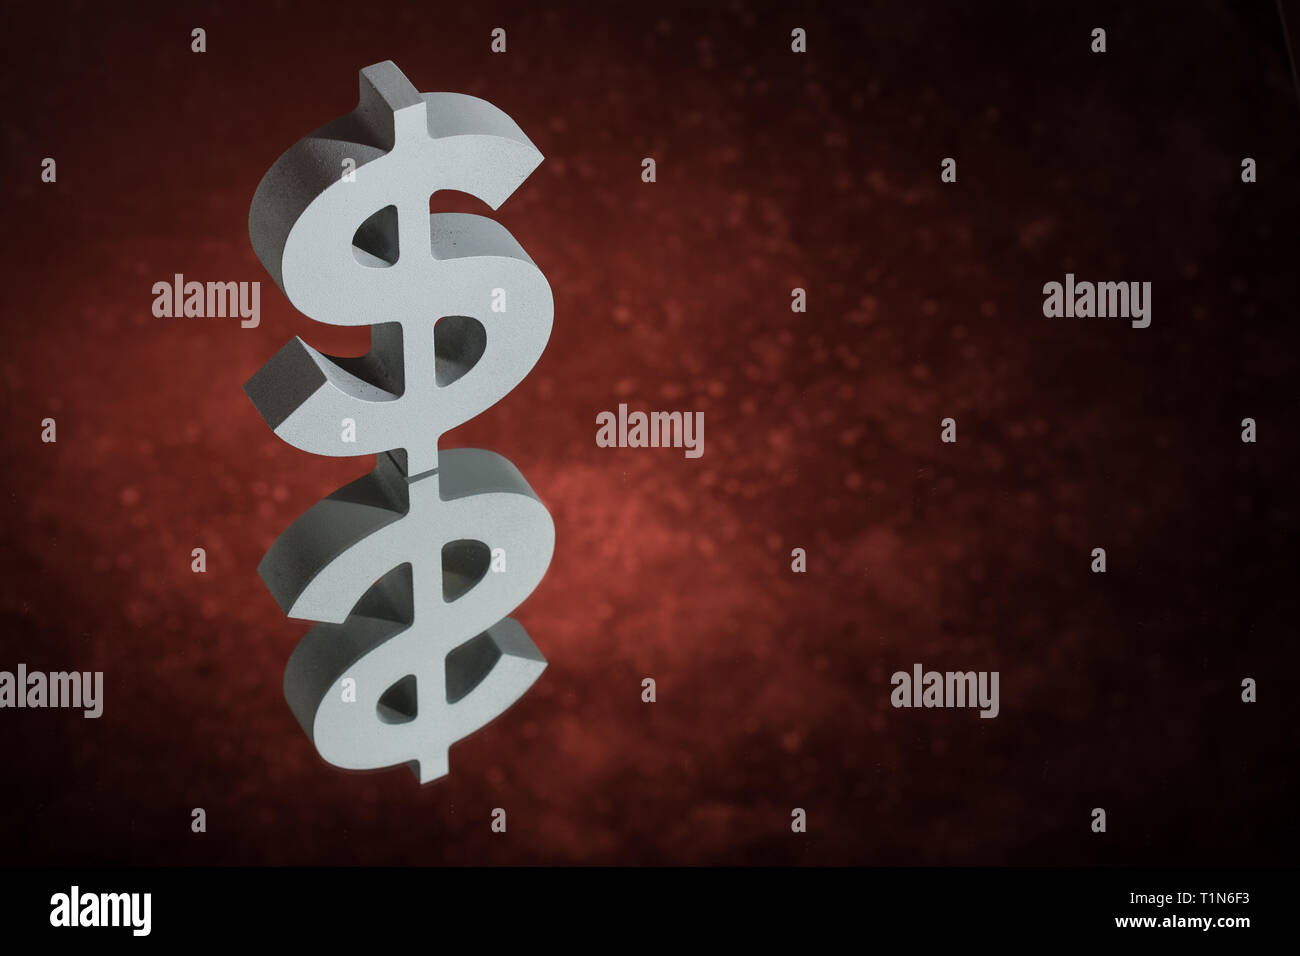 American Currency Symbol or Sign Dollar With Mirror Reflection on Red Dusty Background Stock Photo